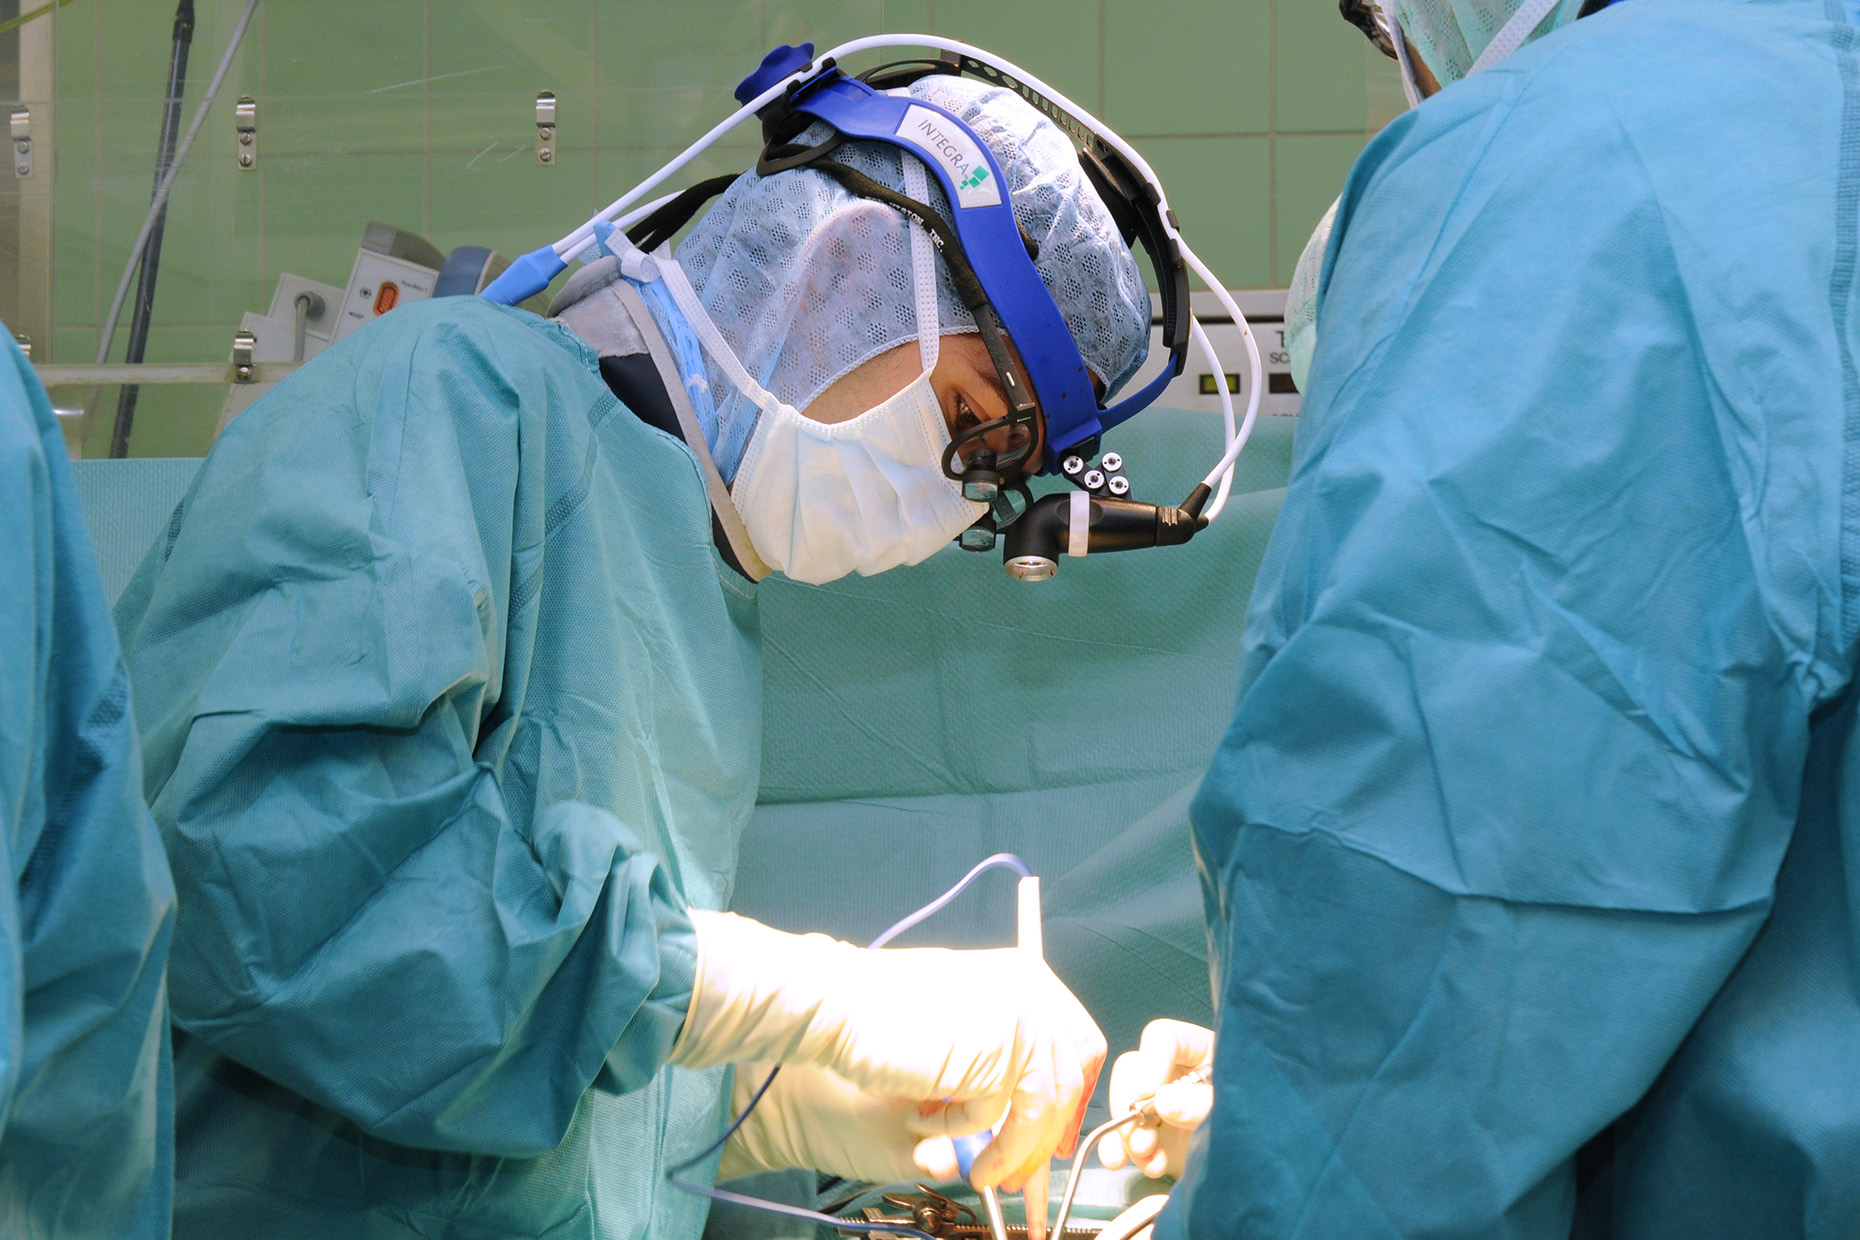 A surgeon operates on a patient's spine in the operating room